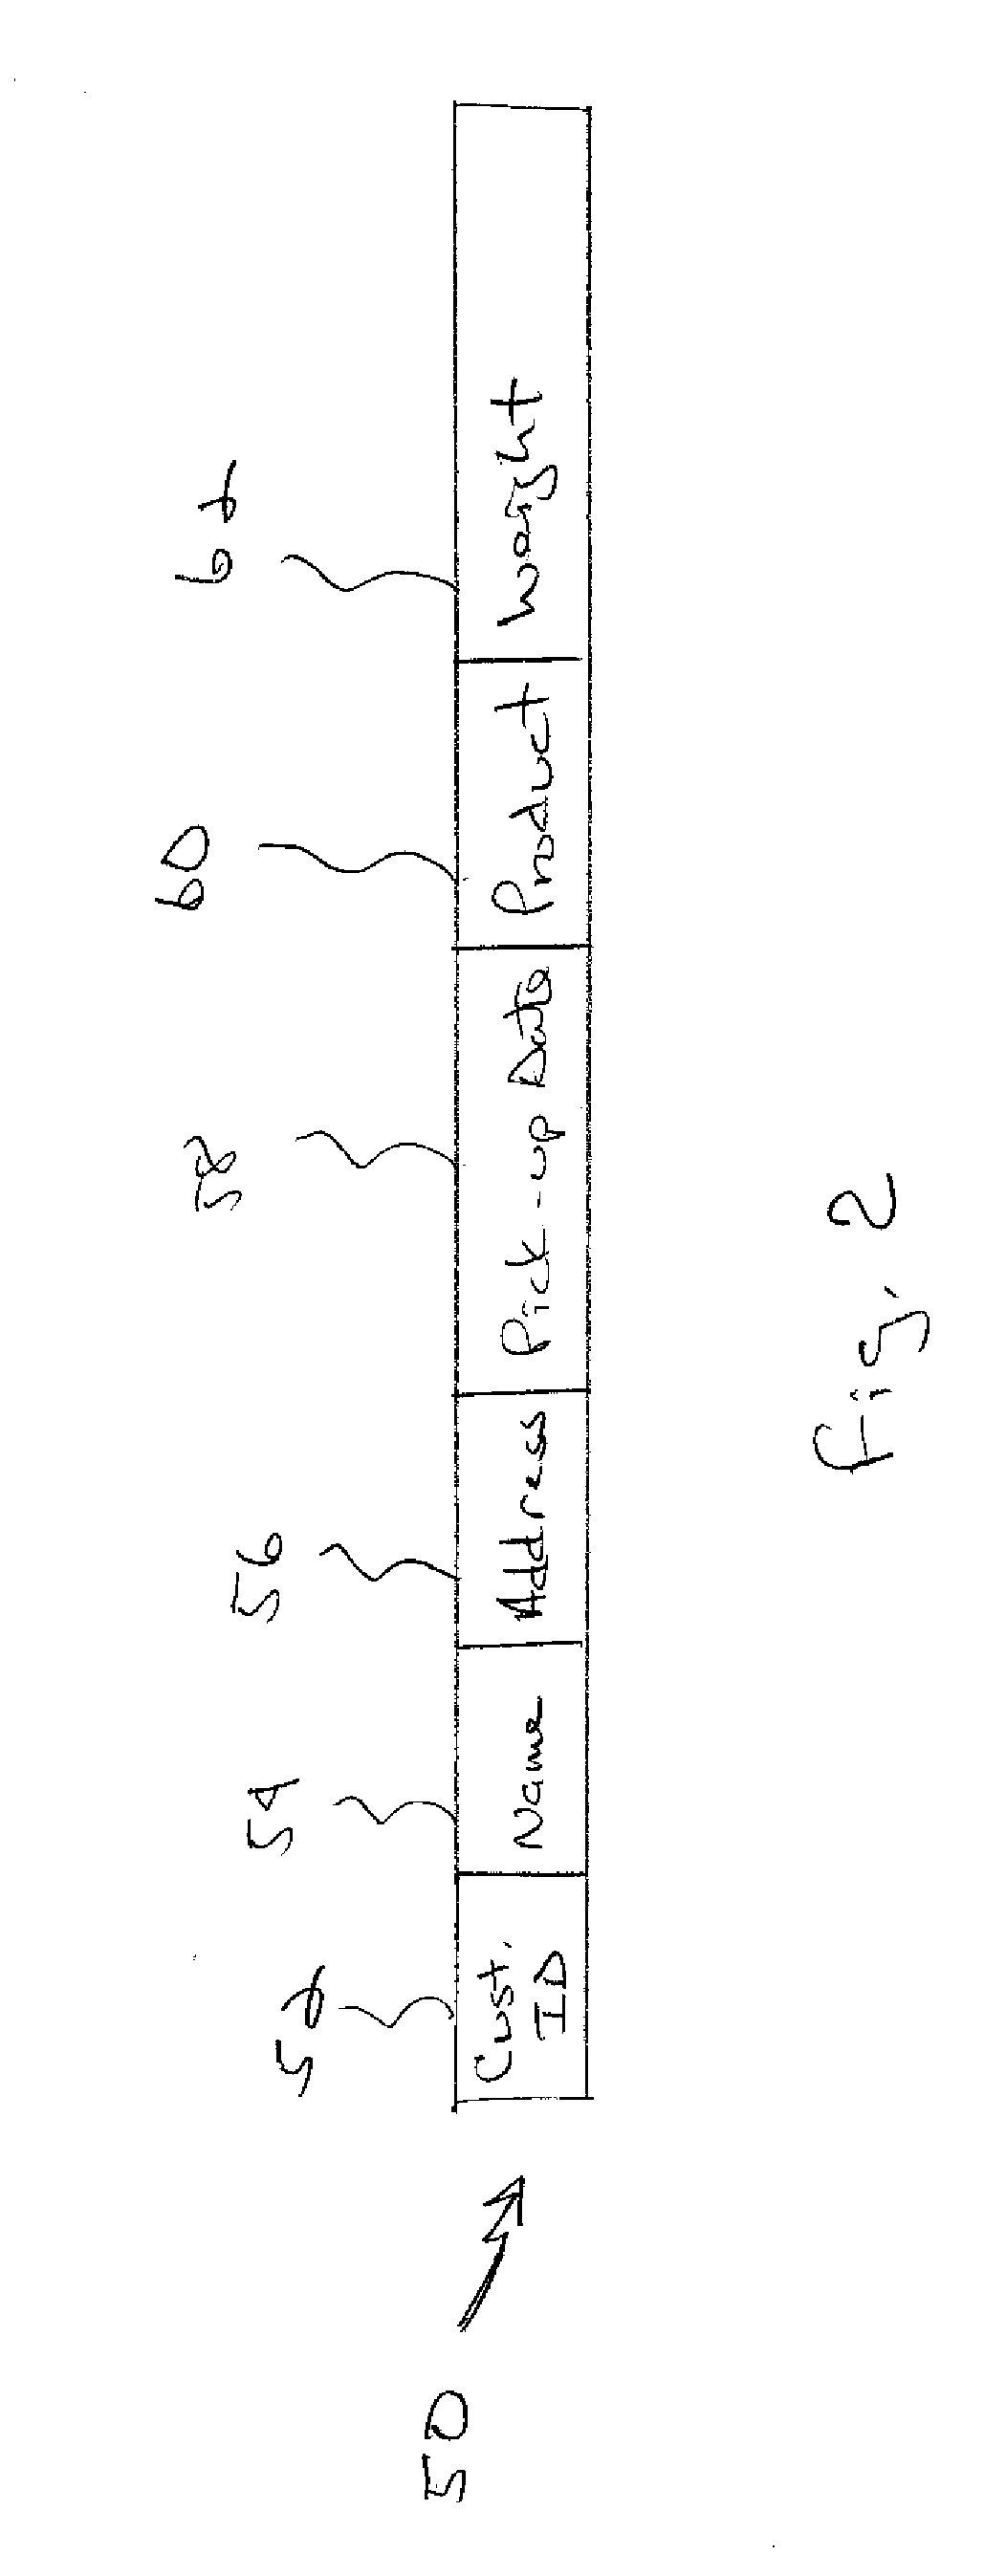 System and method for associating RFID smart labels with customer database records for use with automated tracking of waste and recyclable material